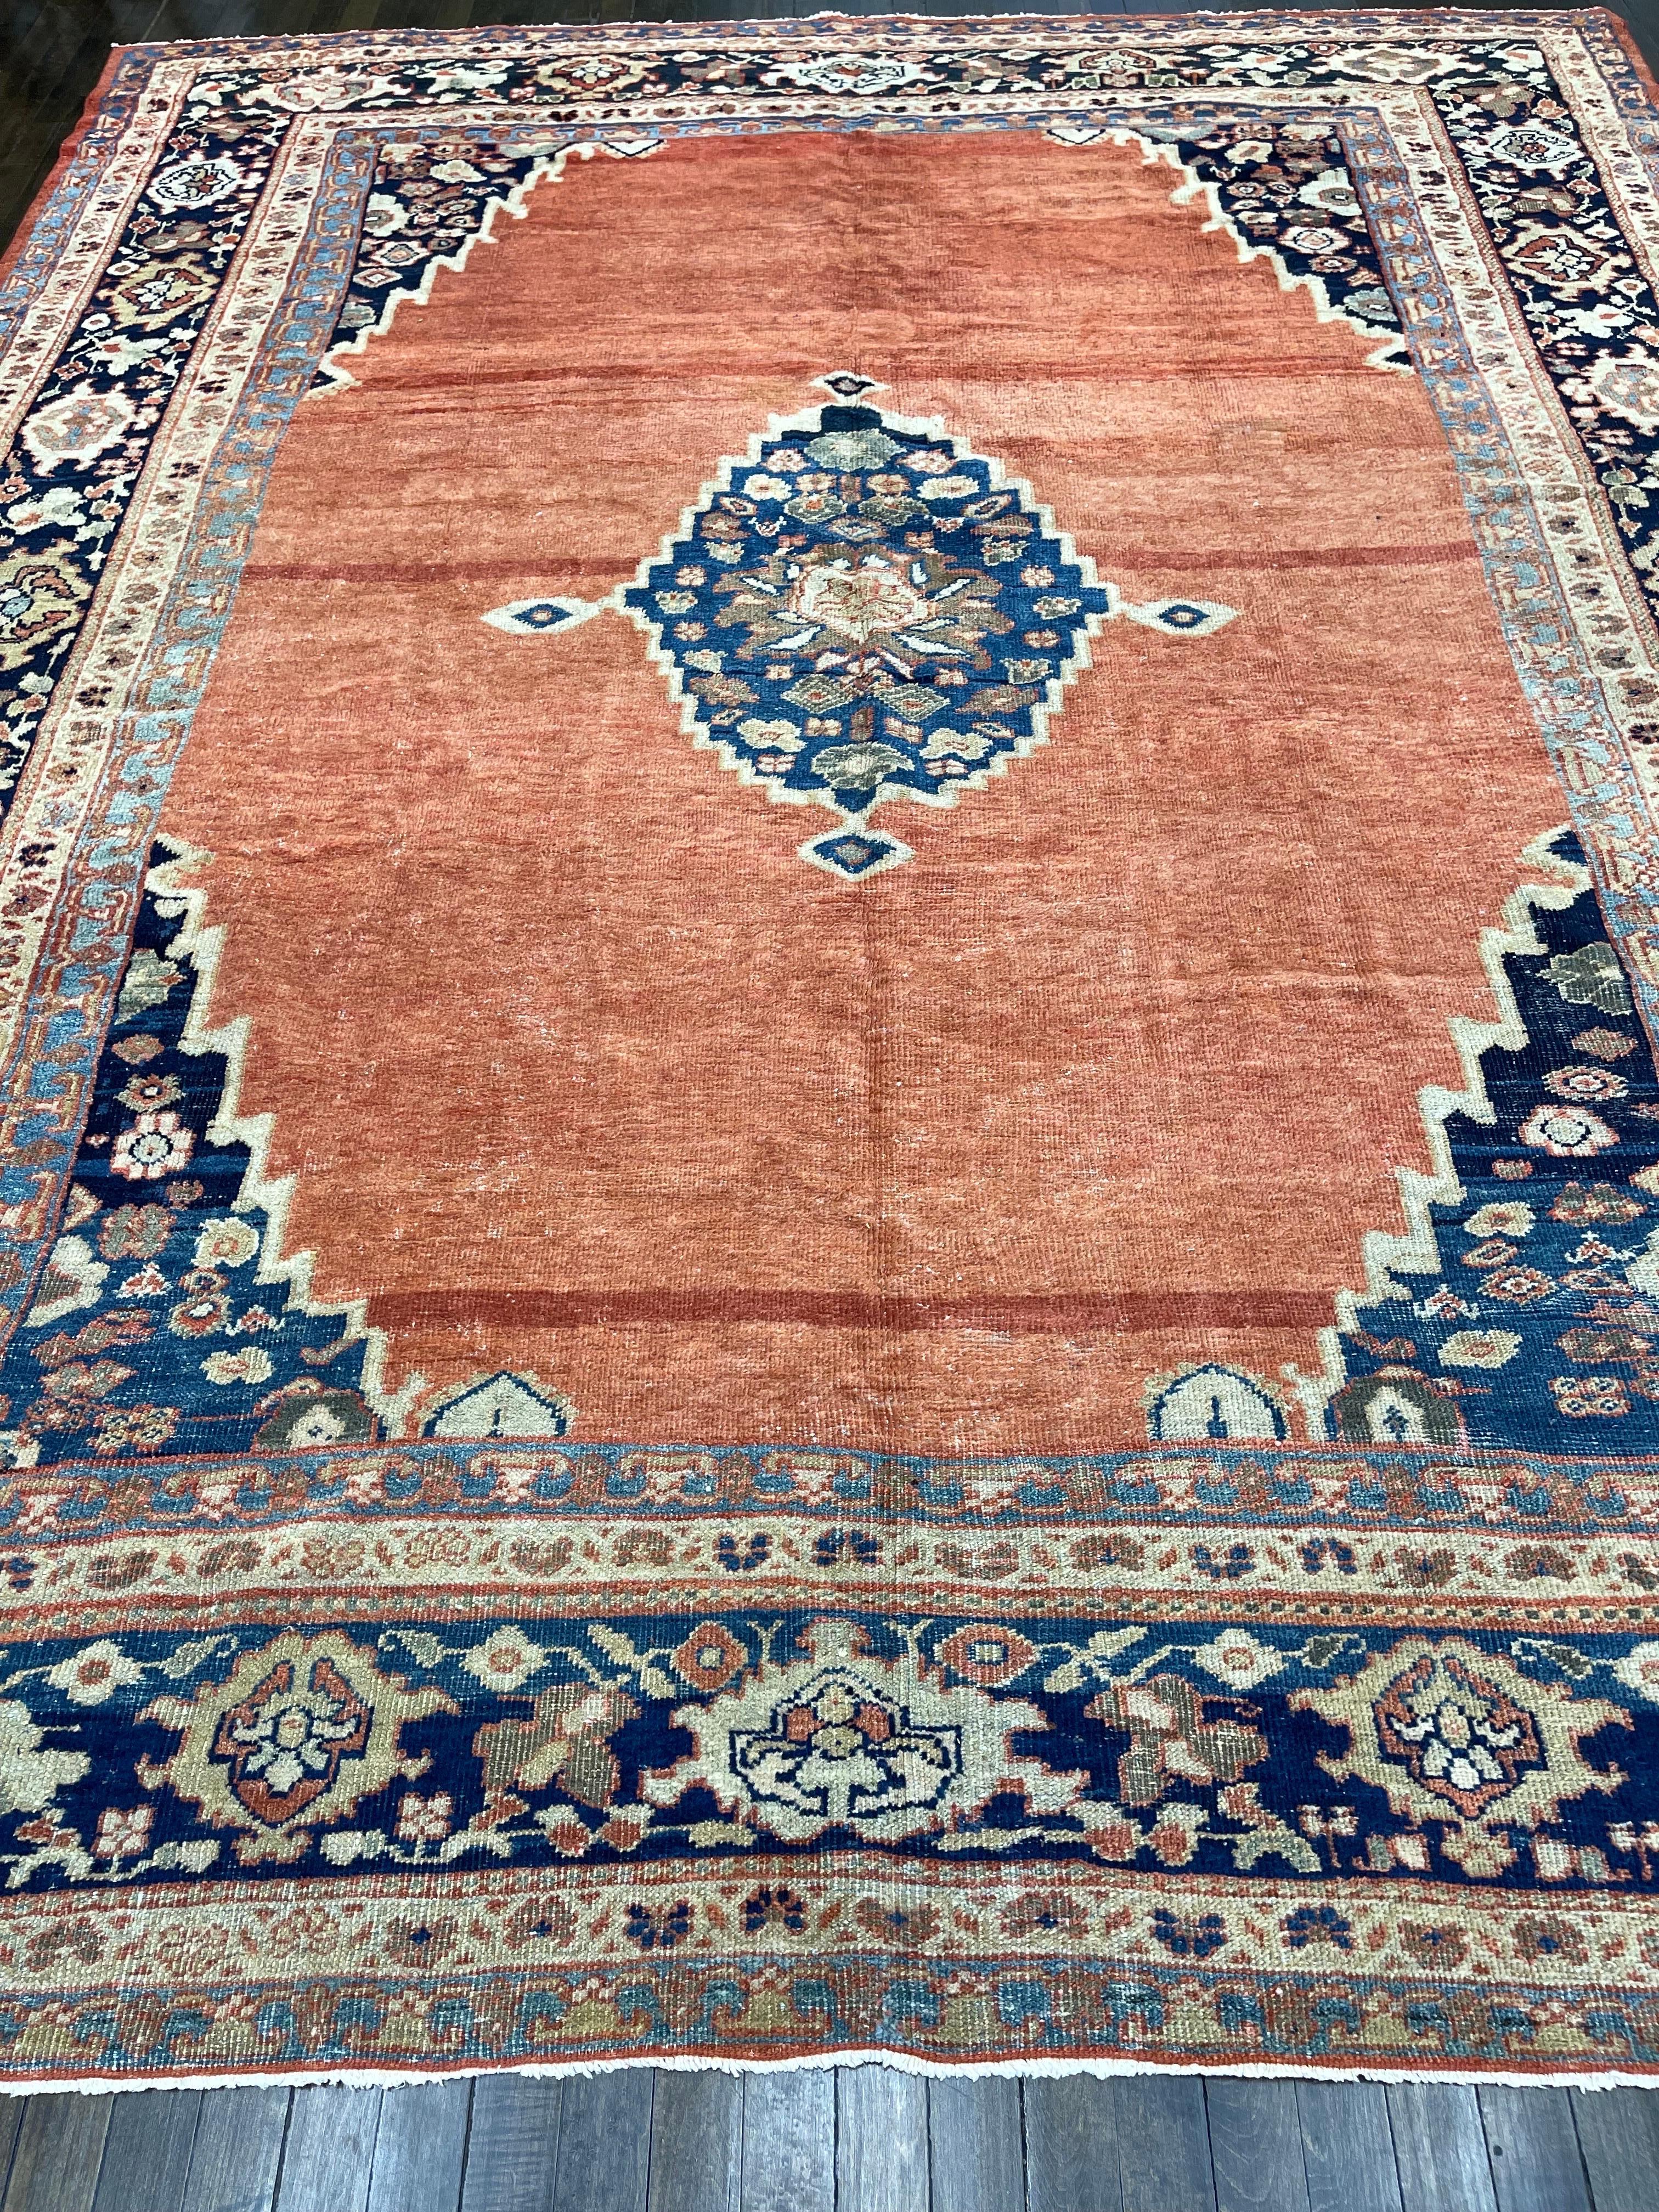 This carpet known as Mahal, is made by the well known European design company Ziegler. In the second half of 19th century, the demand for soft colors and room size carpets increased significantly in Europe and North America. In 1870 Messrs. Ziegler